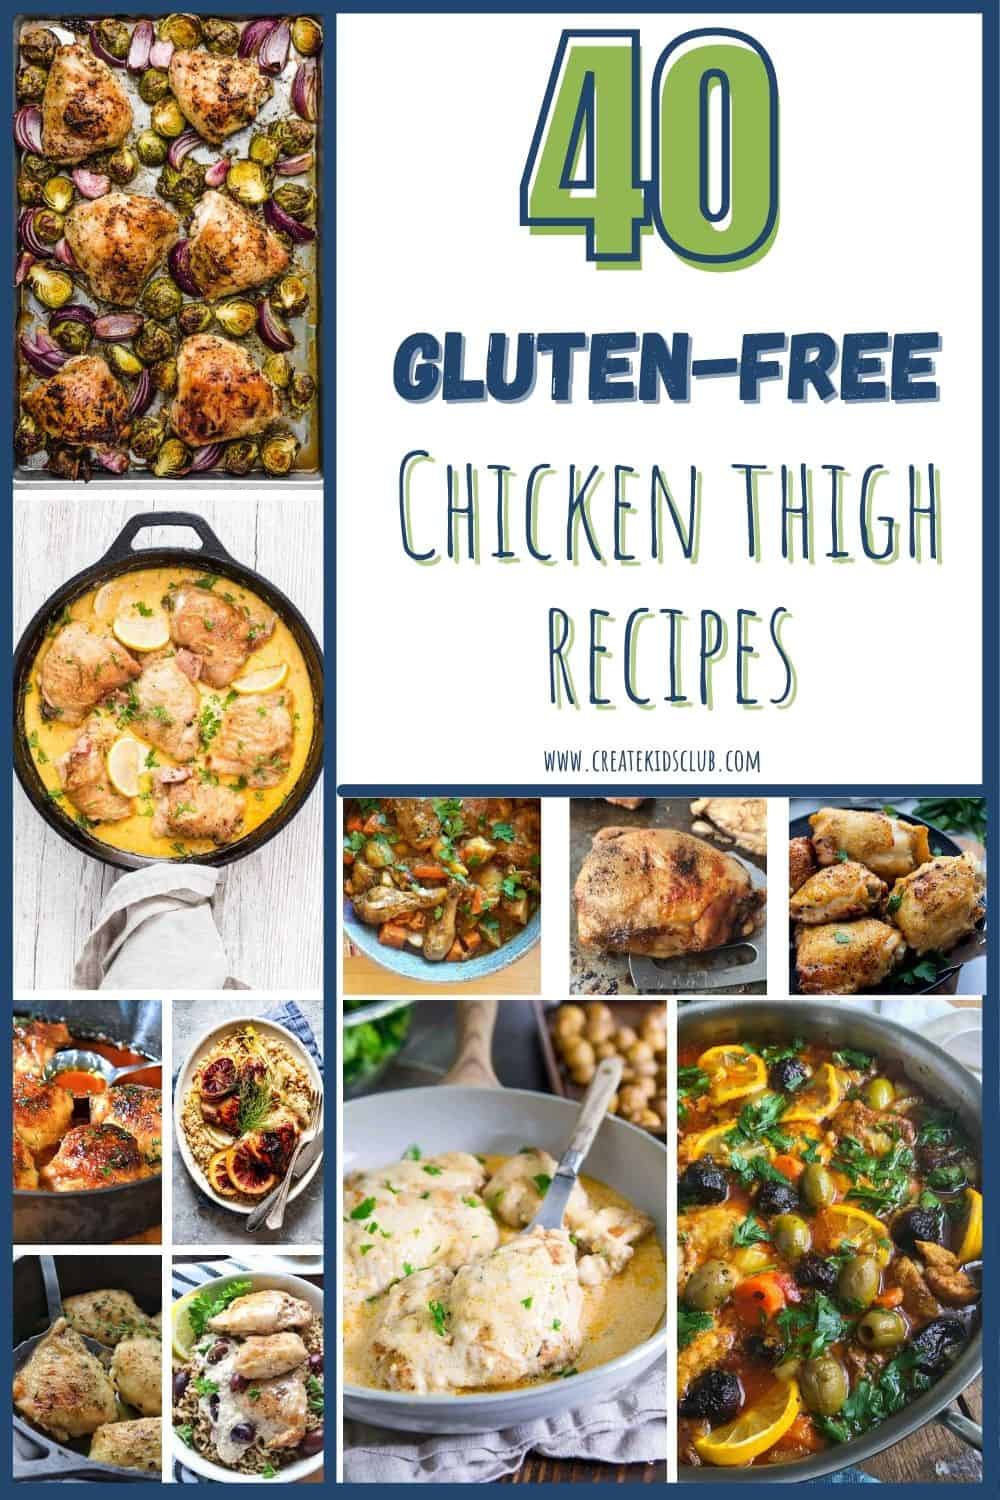 11 pictures of gluten free chicken thigh recipes.